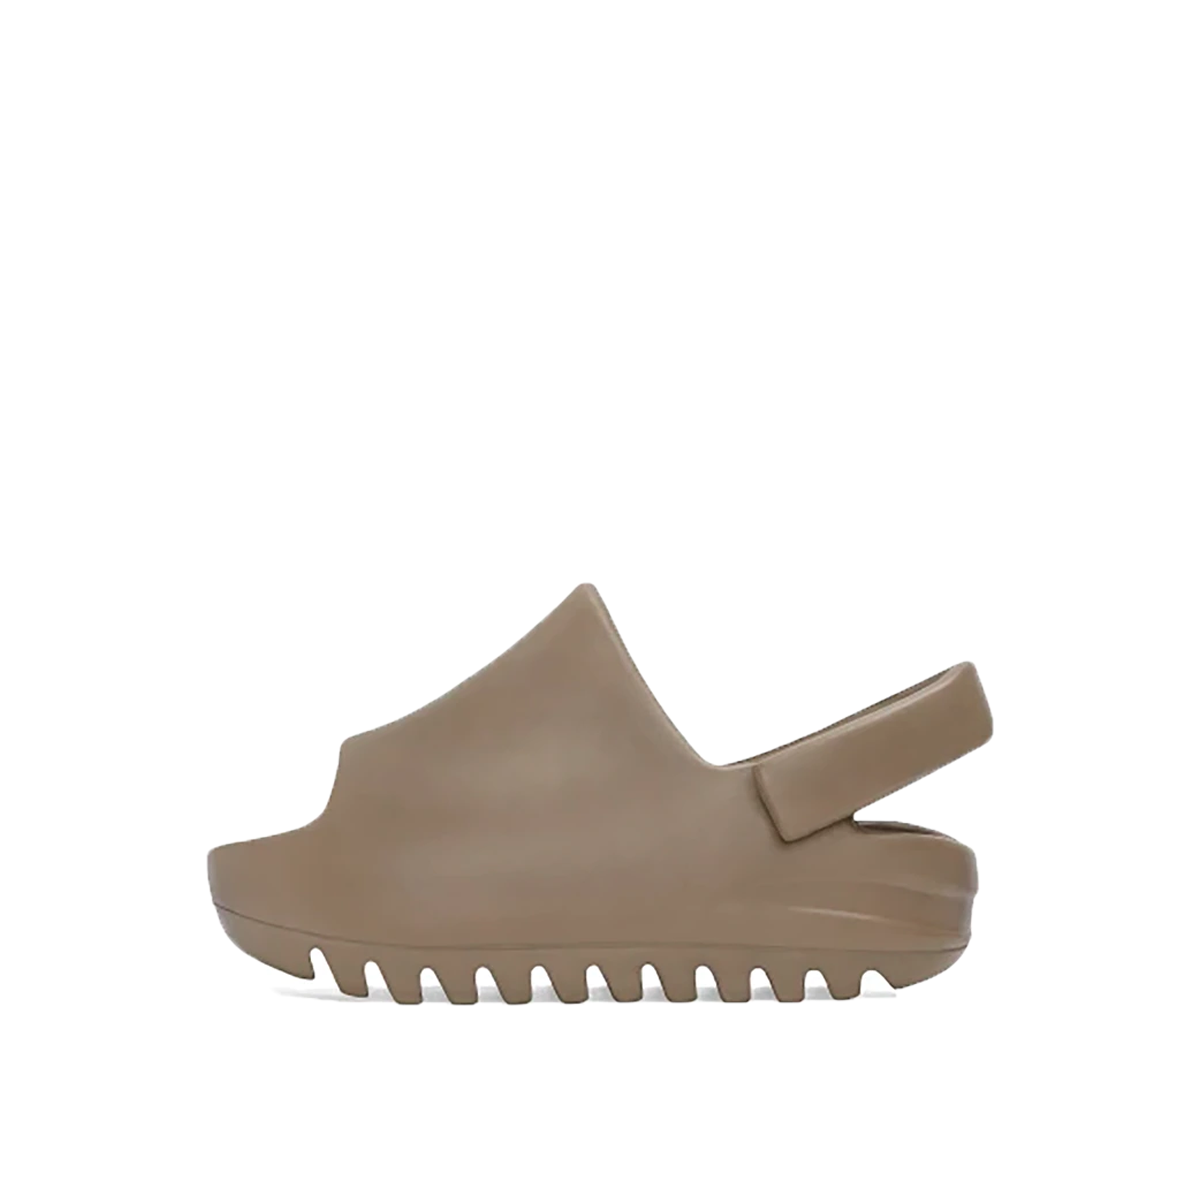 Adidas yeezy slides brown que je t aime